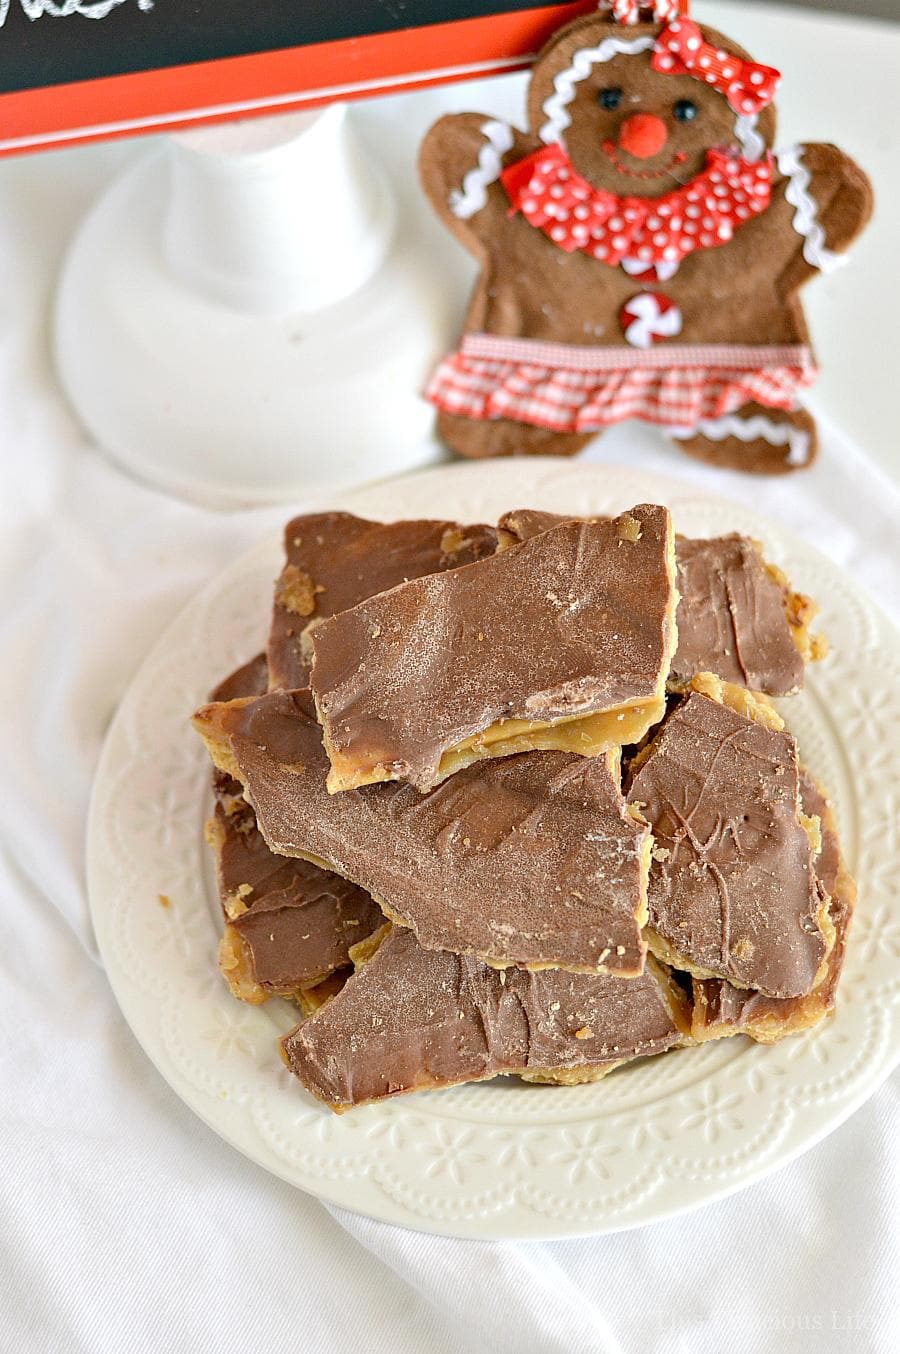 This gluten-free Christmas crack is an addicting holiday candy that is SO easy to make! Like, just a few ingredients and a few minutes easy. Everyone will be coming back for more with this Christmas treat.